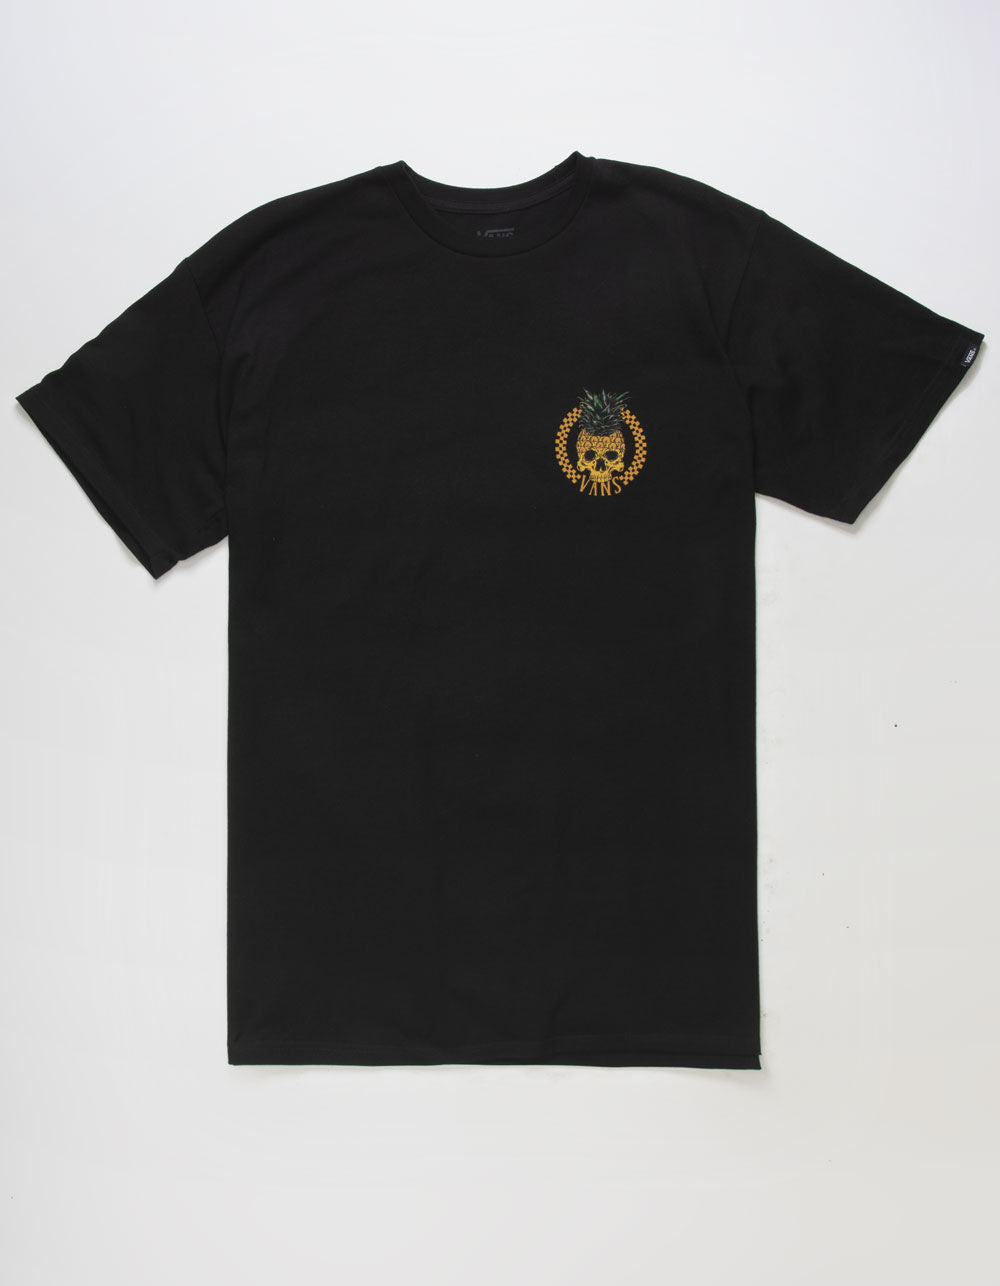 Served Fresh Daily SS Black Tee